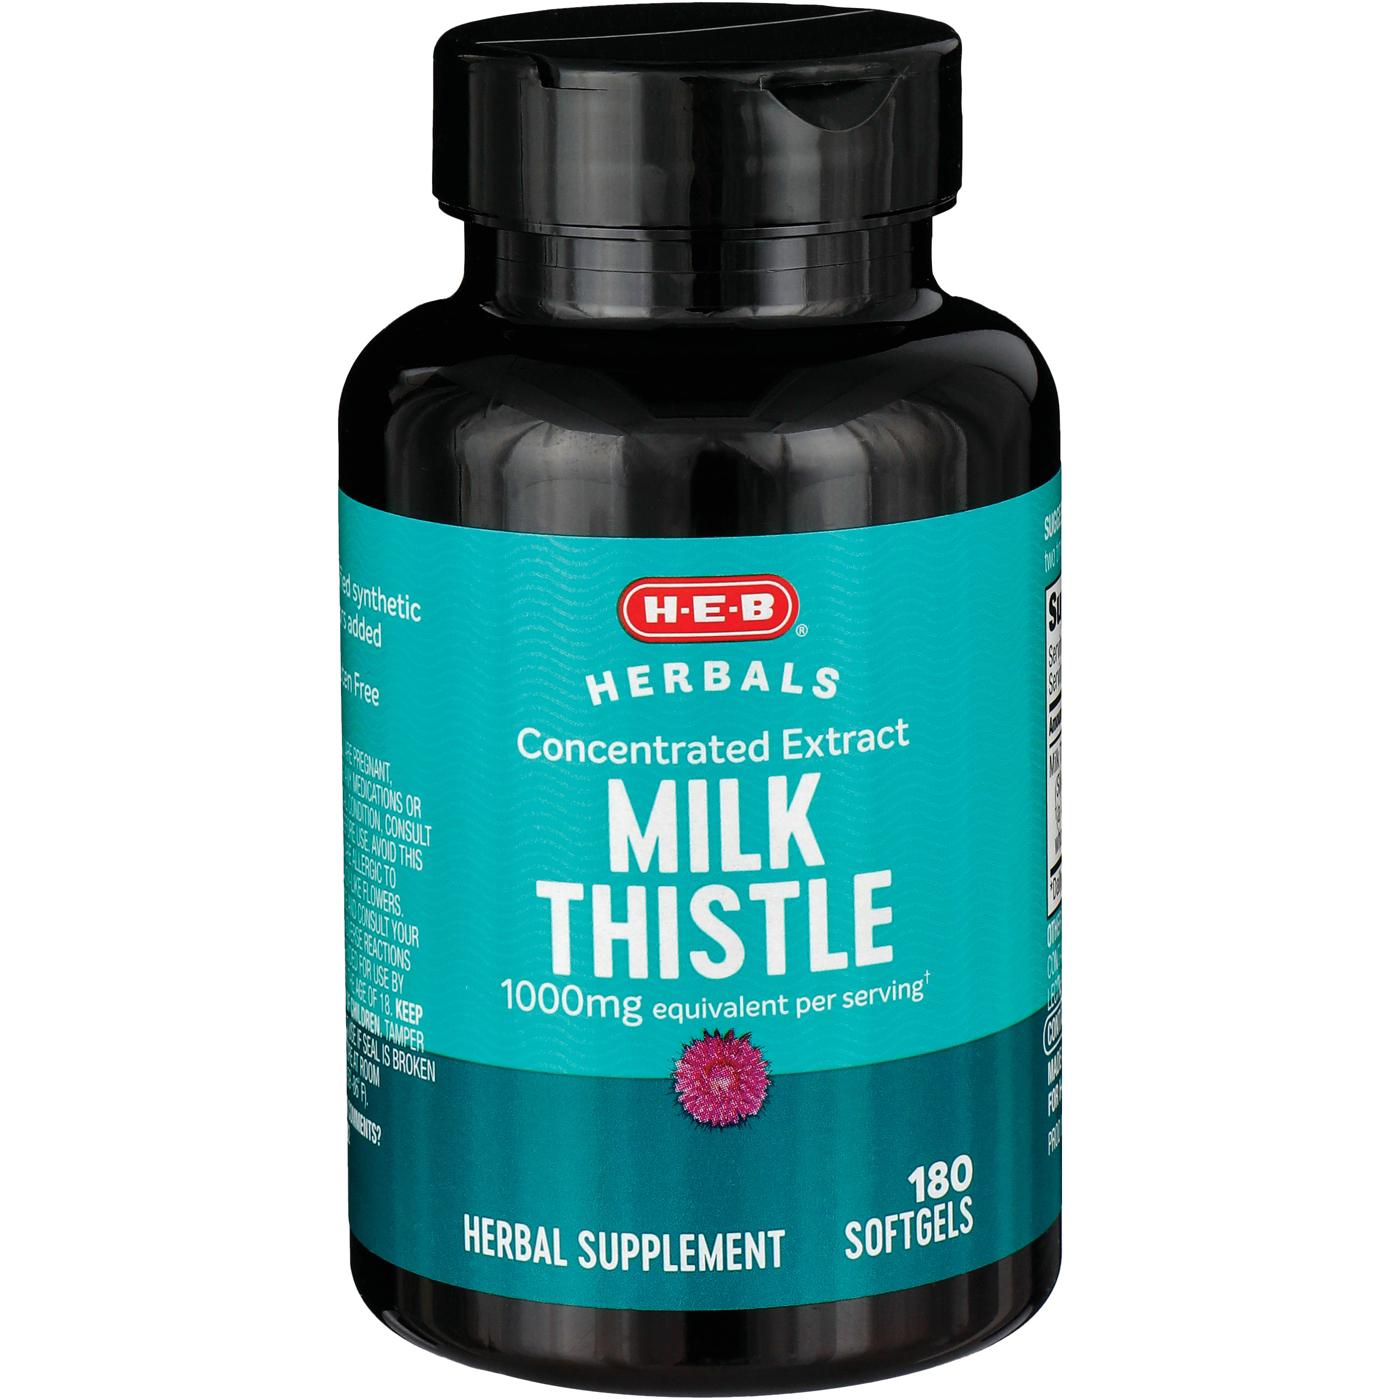 H-E-B Herbals Milk Thistle Extract Capsules - 1,000 mg; image 1 of 2